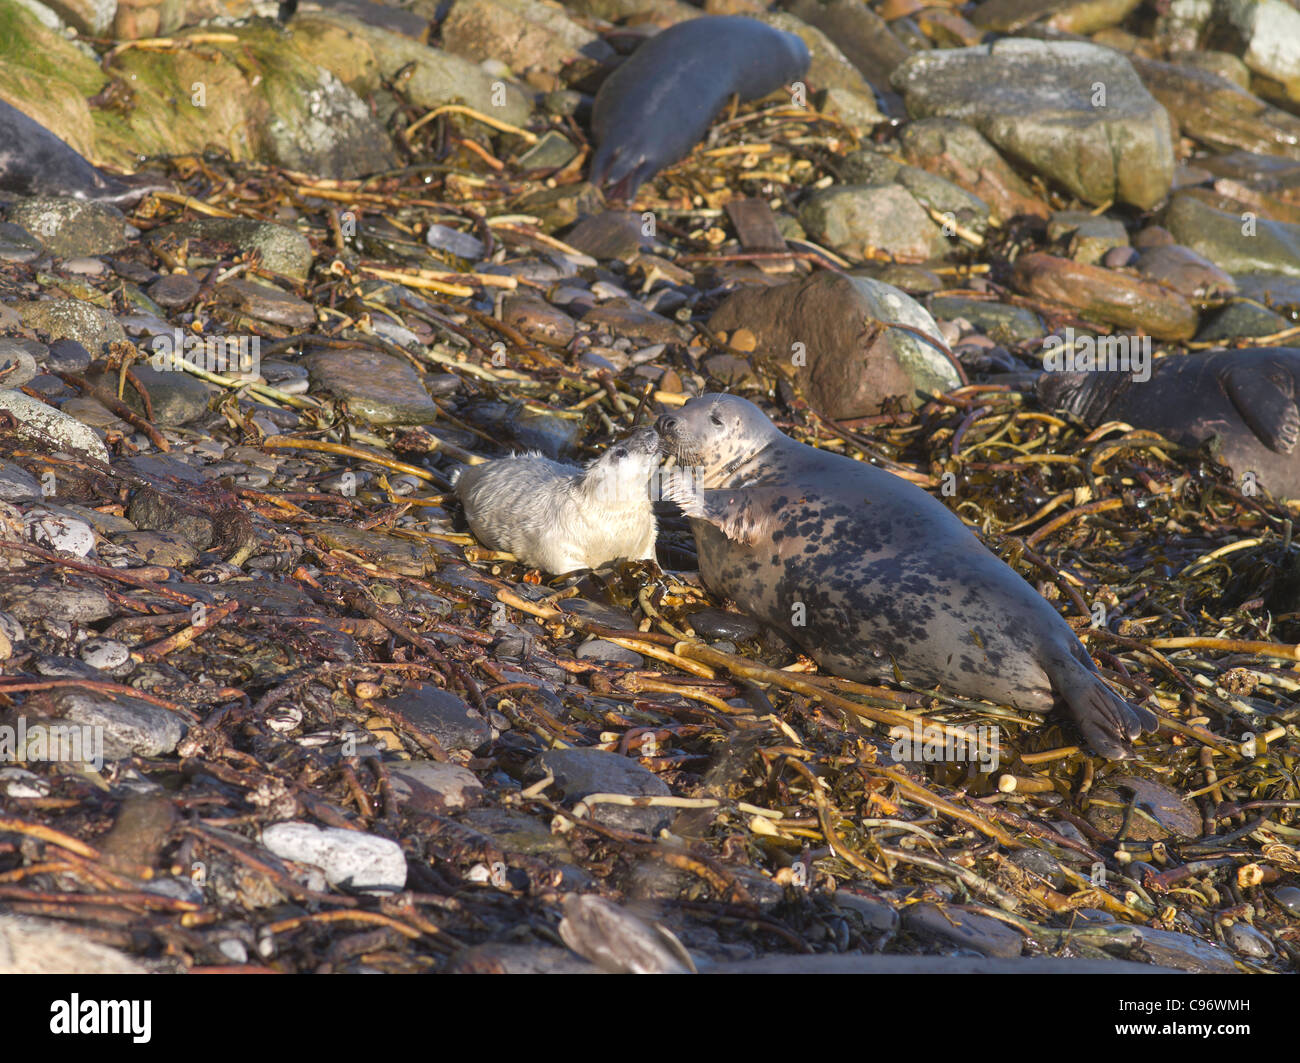 dh Atlantic Seal SEALS UK Scottish baby grey seal pup with mother seals cub shore rock halichoerus grypus group earless rocks scotland Orkney Stock Photo